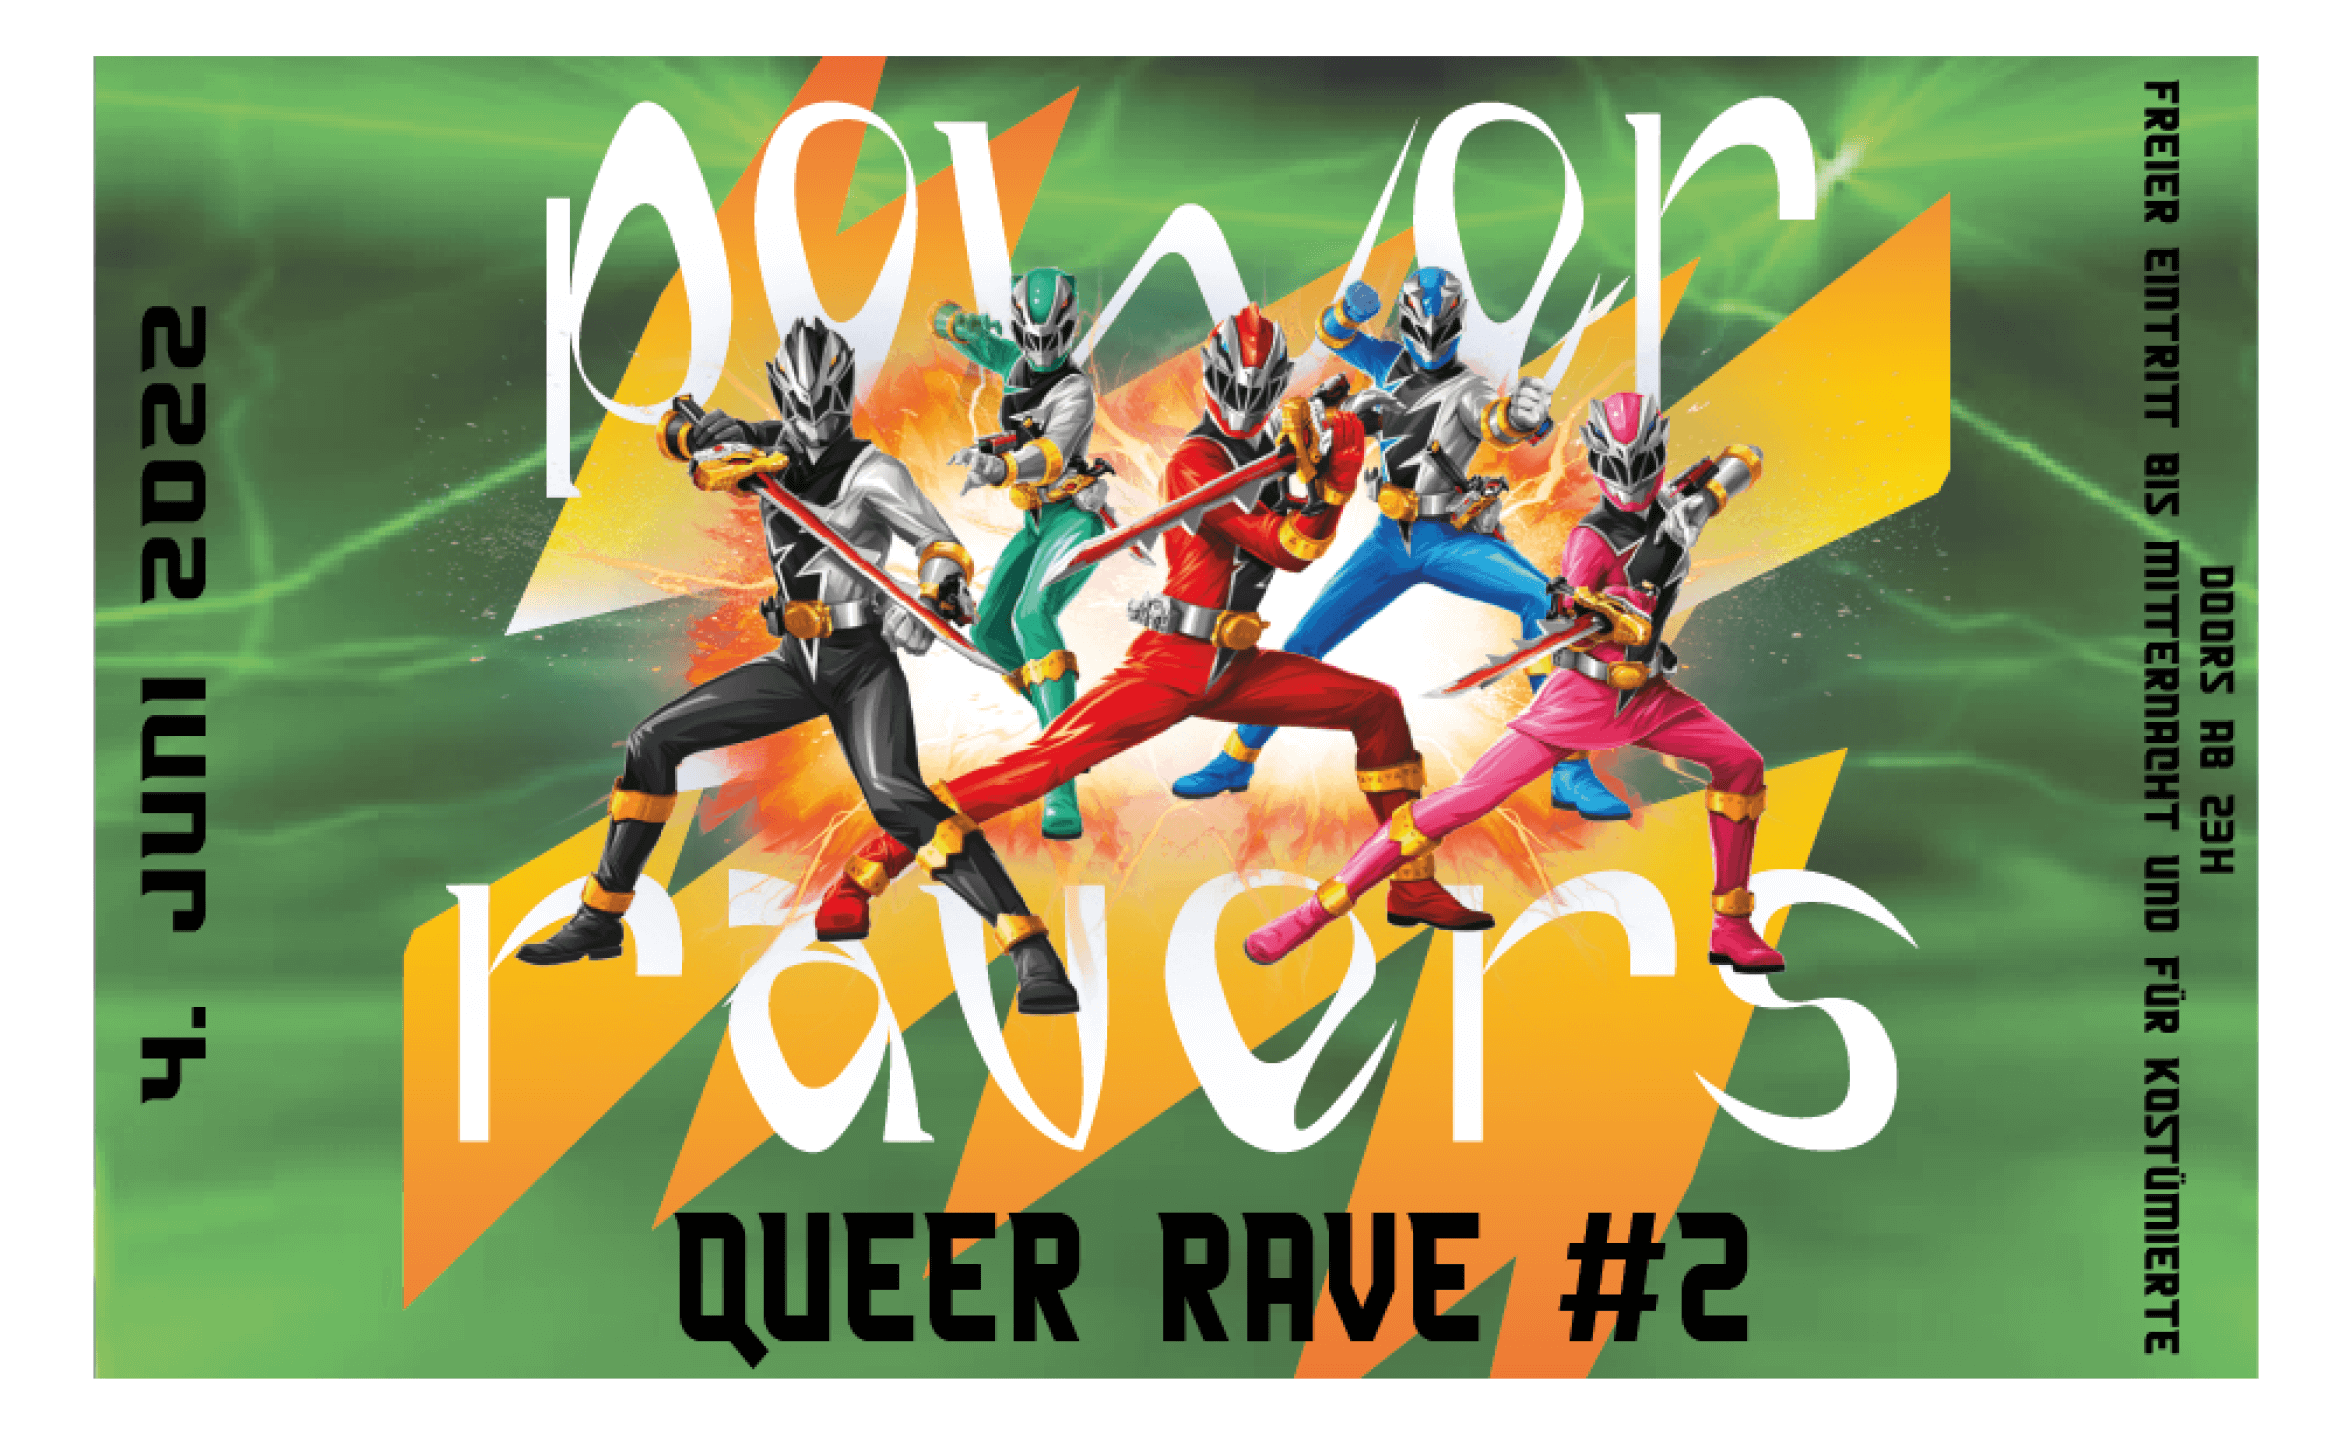 Event-Image for 'Power Ravers  #4  - Queer Rave at HEIMAT'